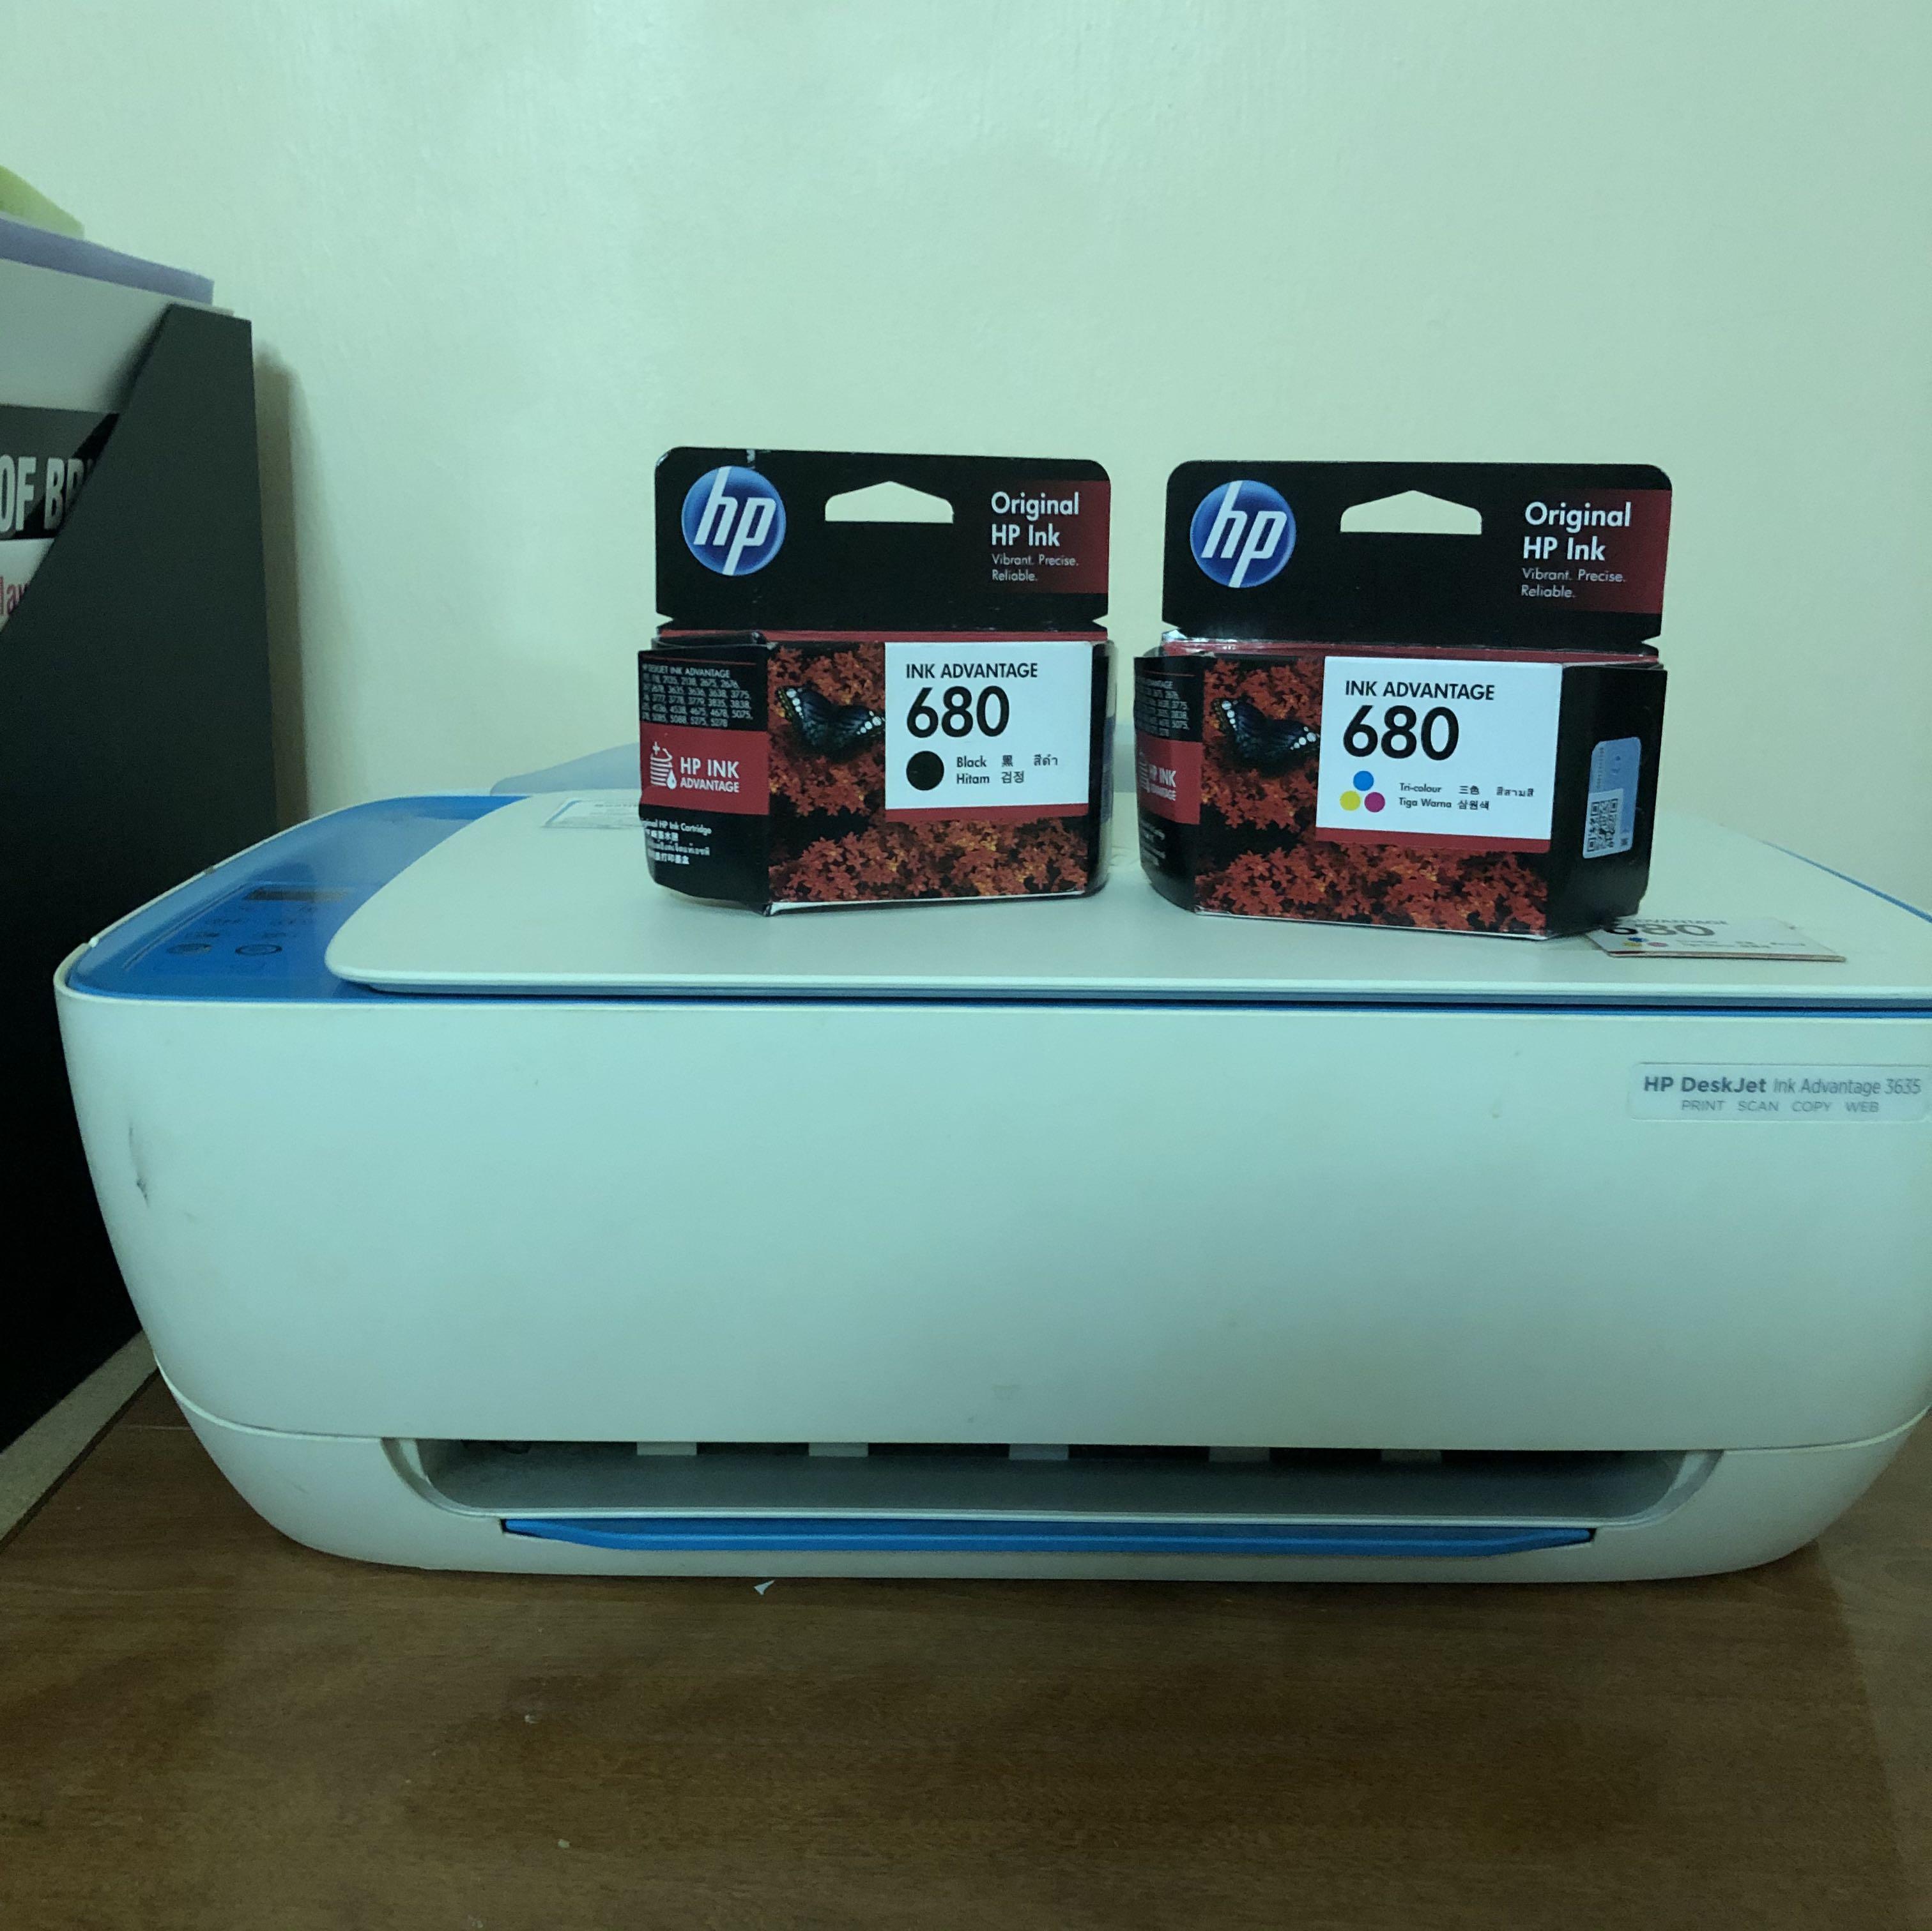 FREE INK] Wireless HP DeskJet 3635 All-in-one Printer, Computers & Tech, & Notebooks on Carousell